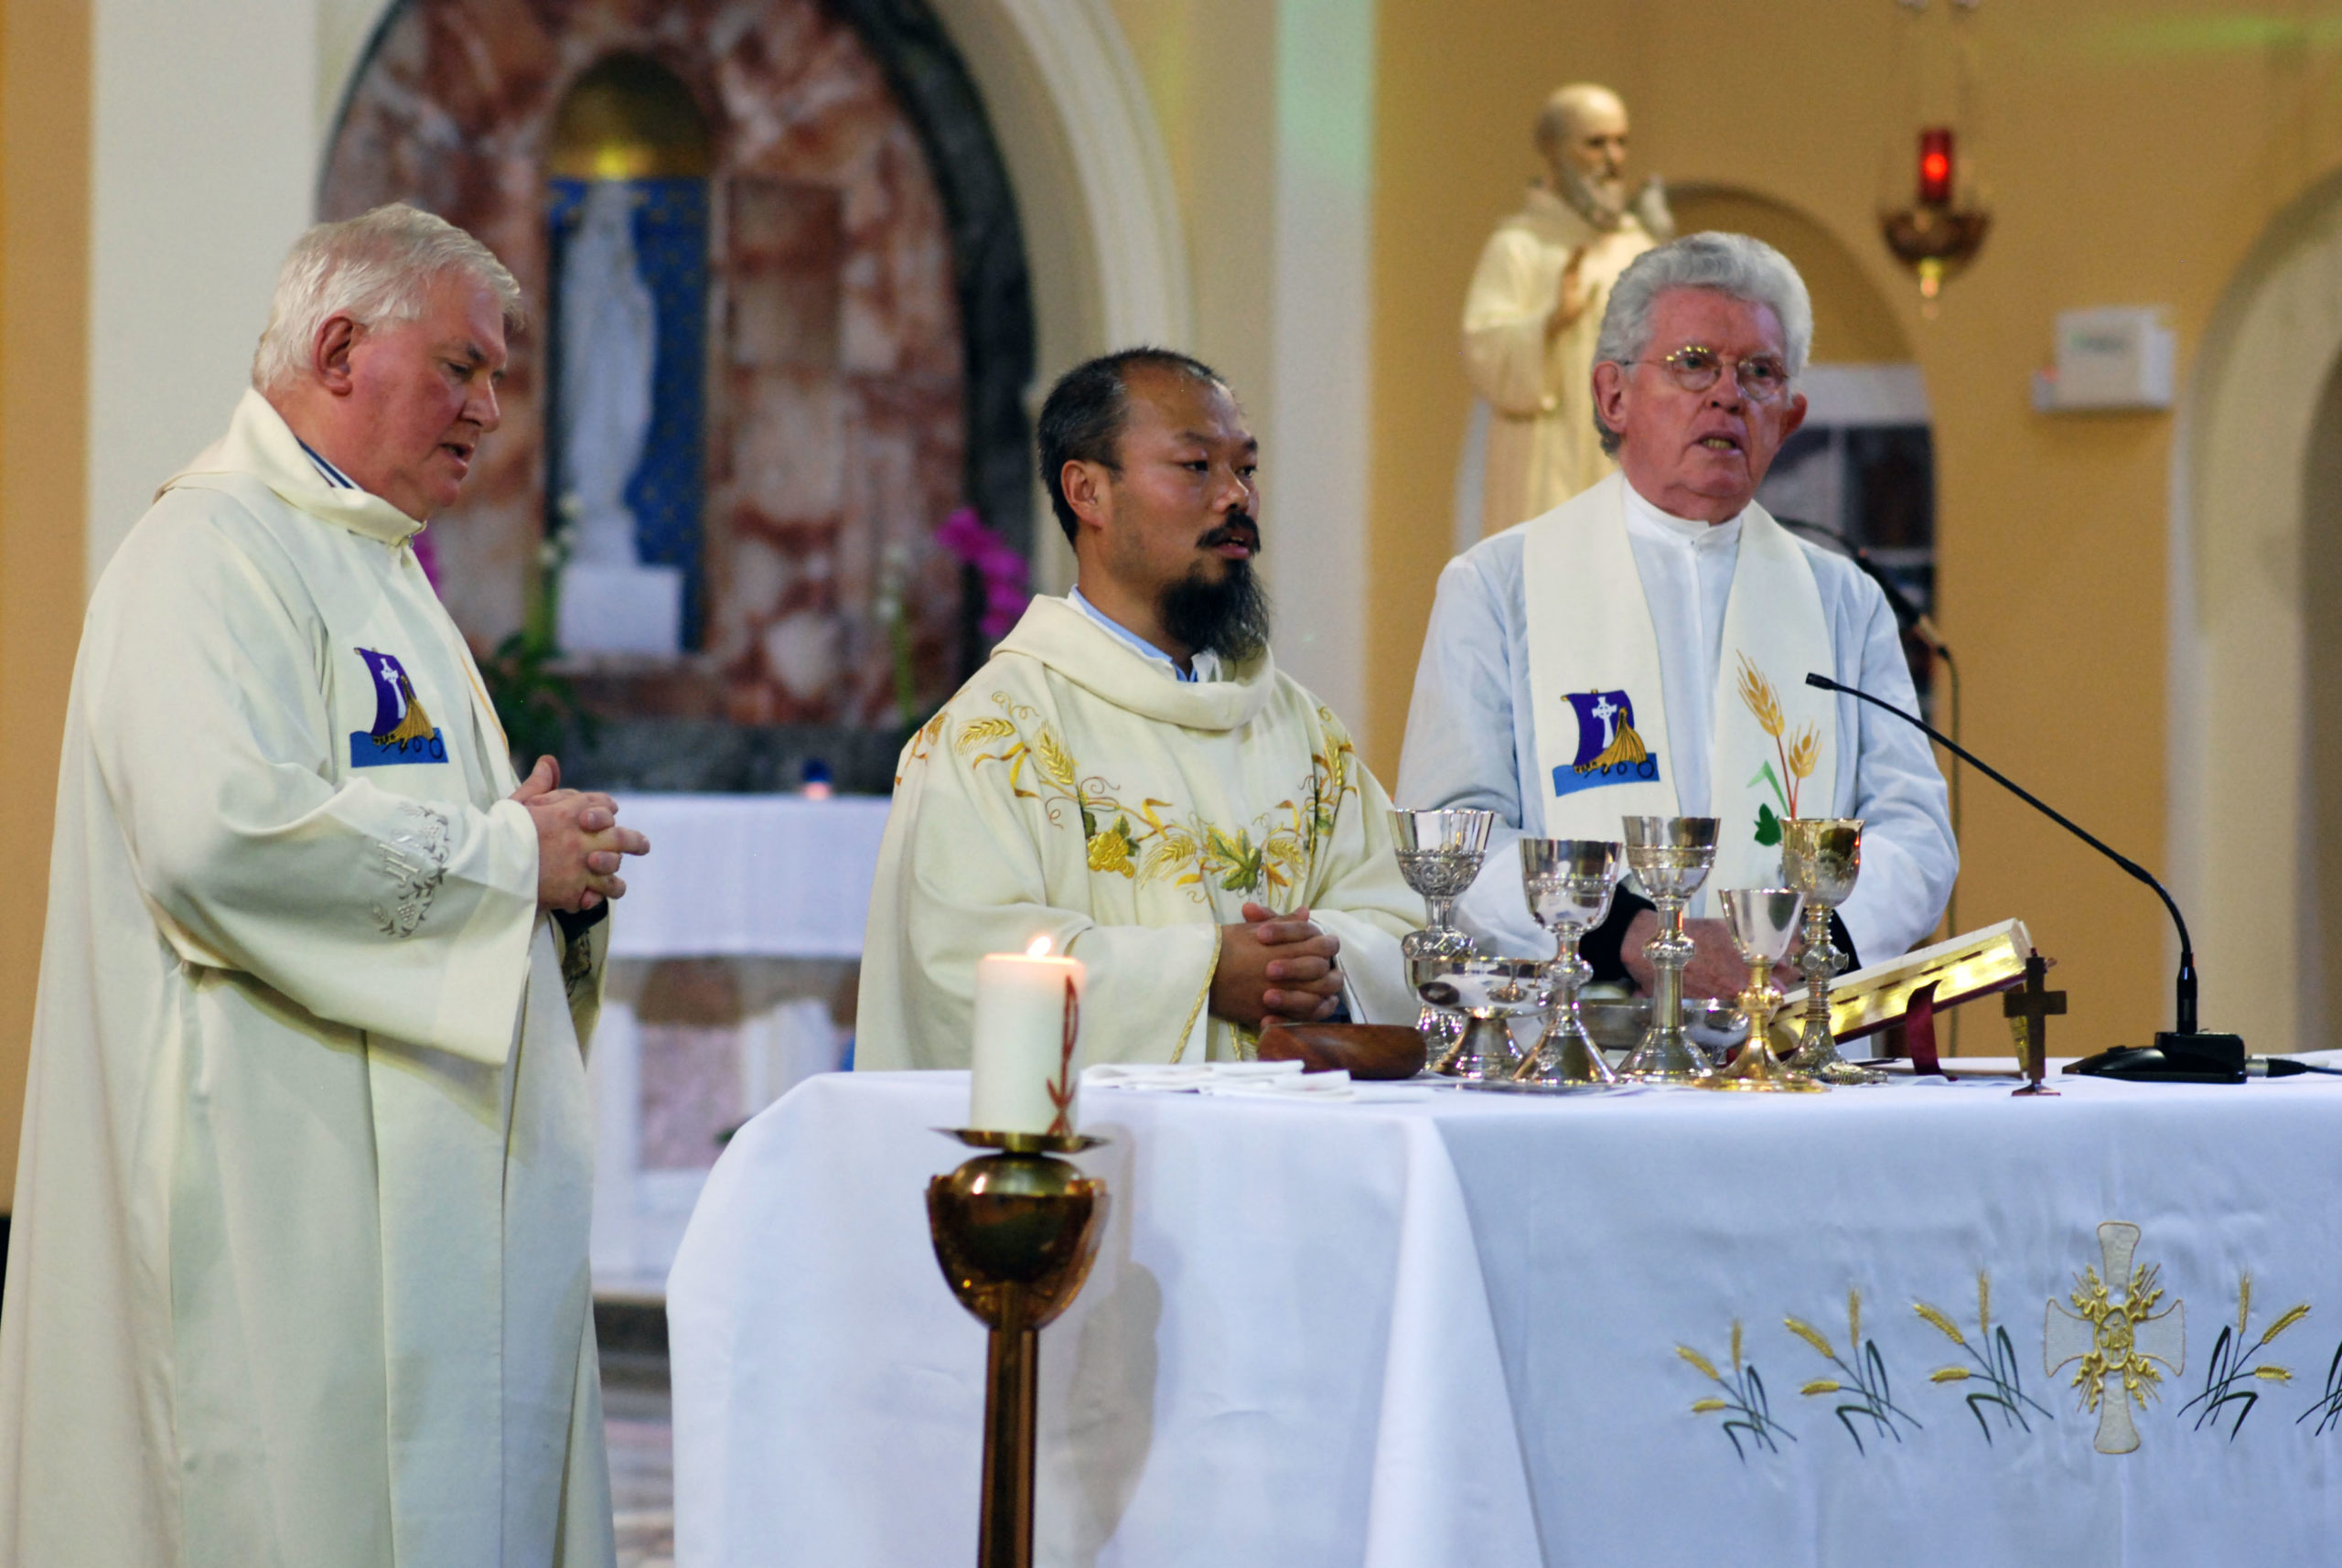 Fr Peter Dong leads celebration for Feast of St Columban